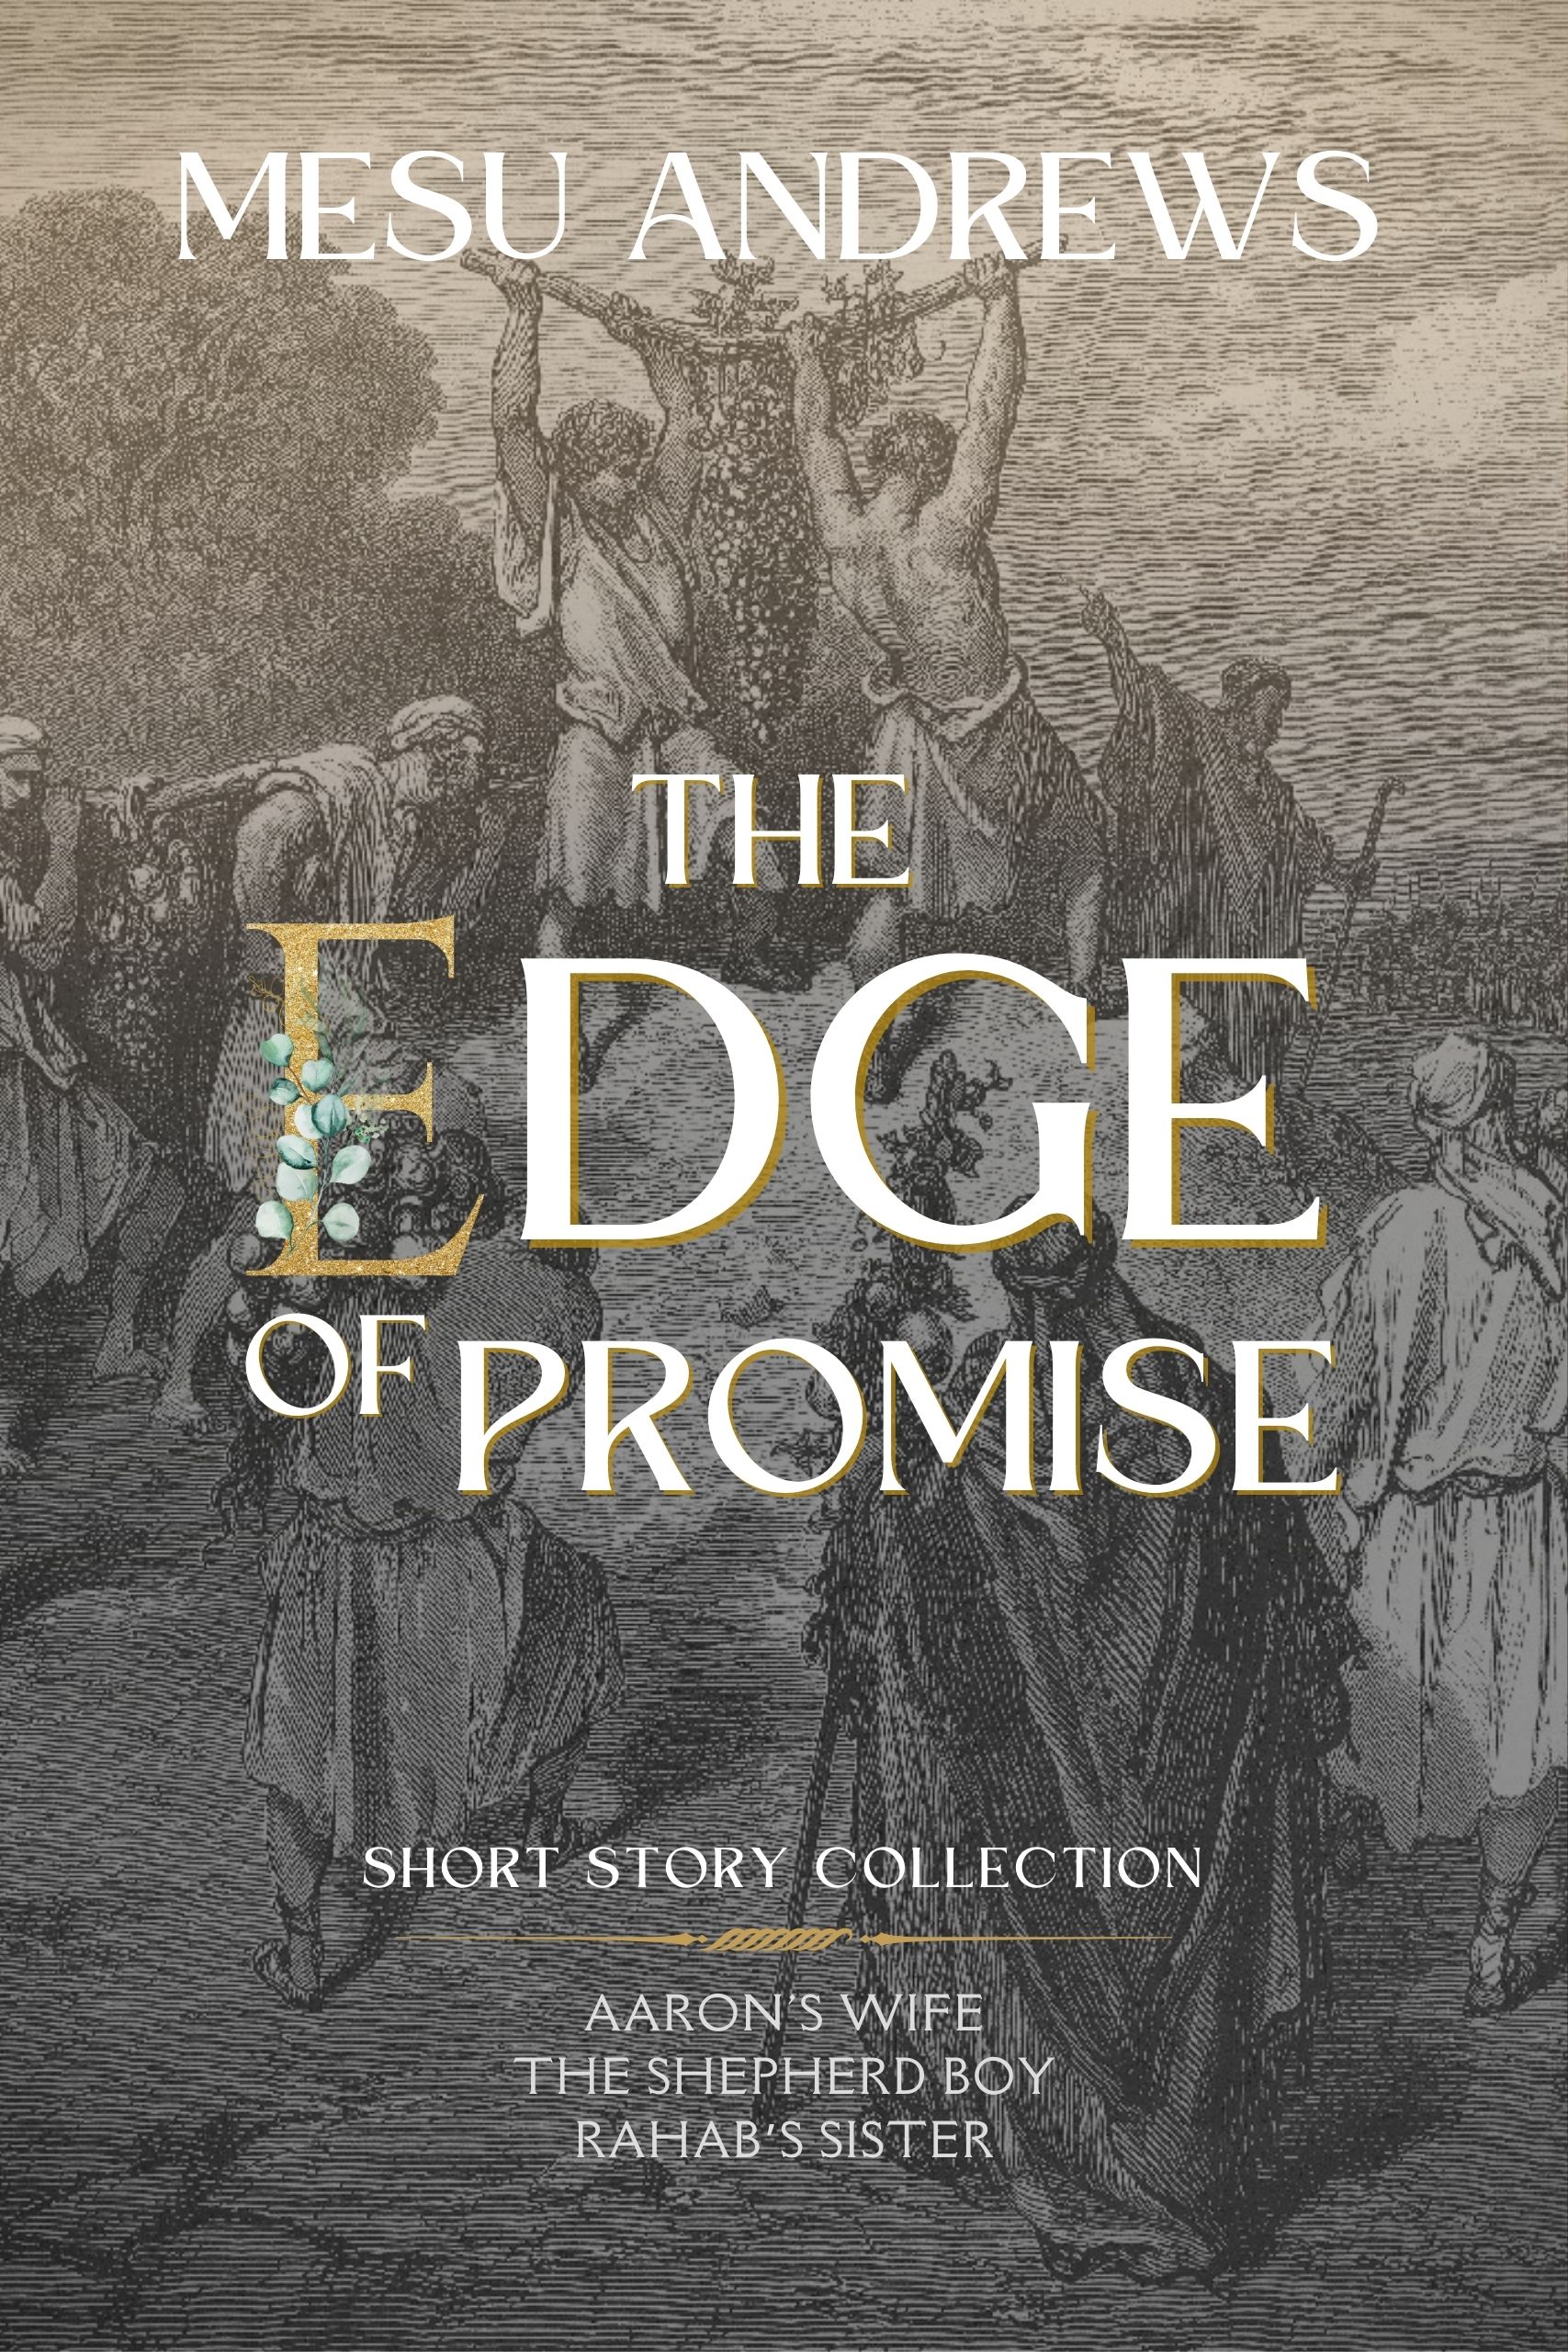 The Edge of Promise by Mesu Andrews